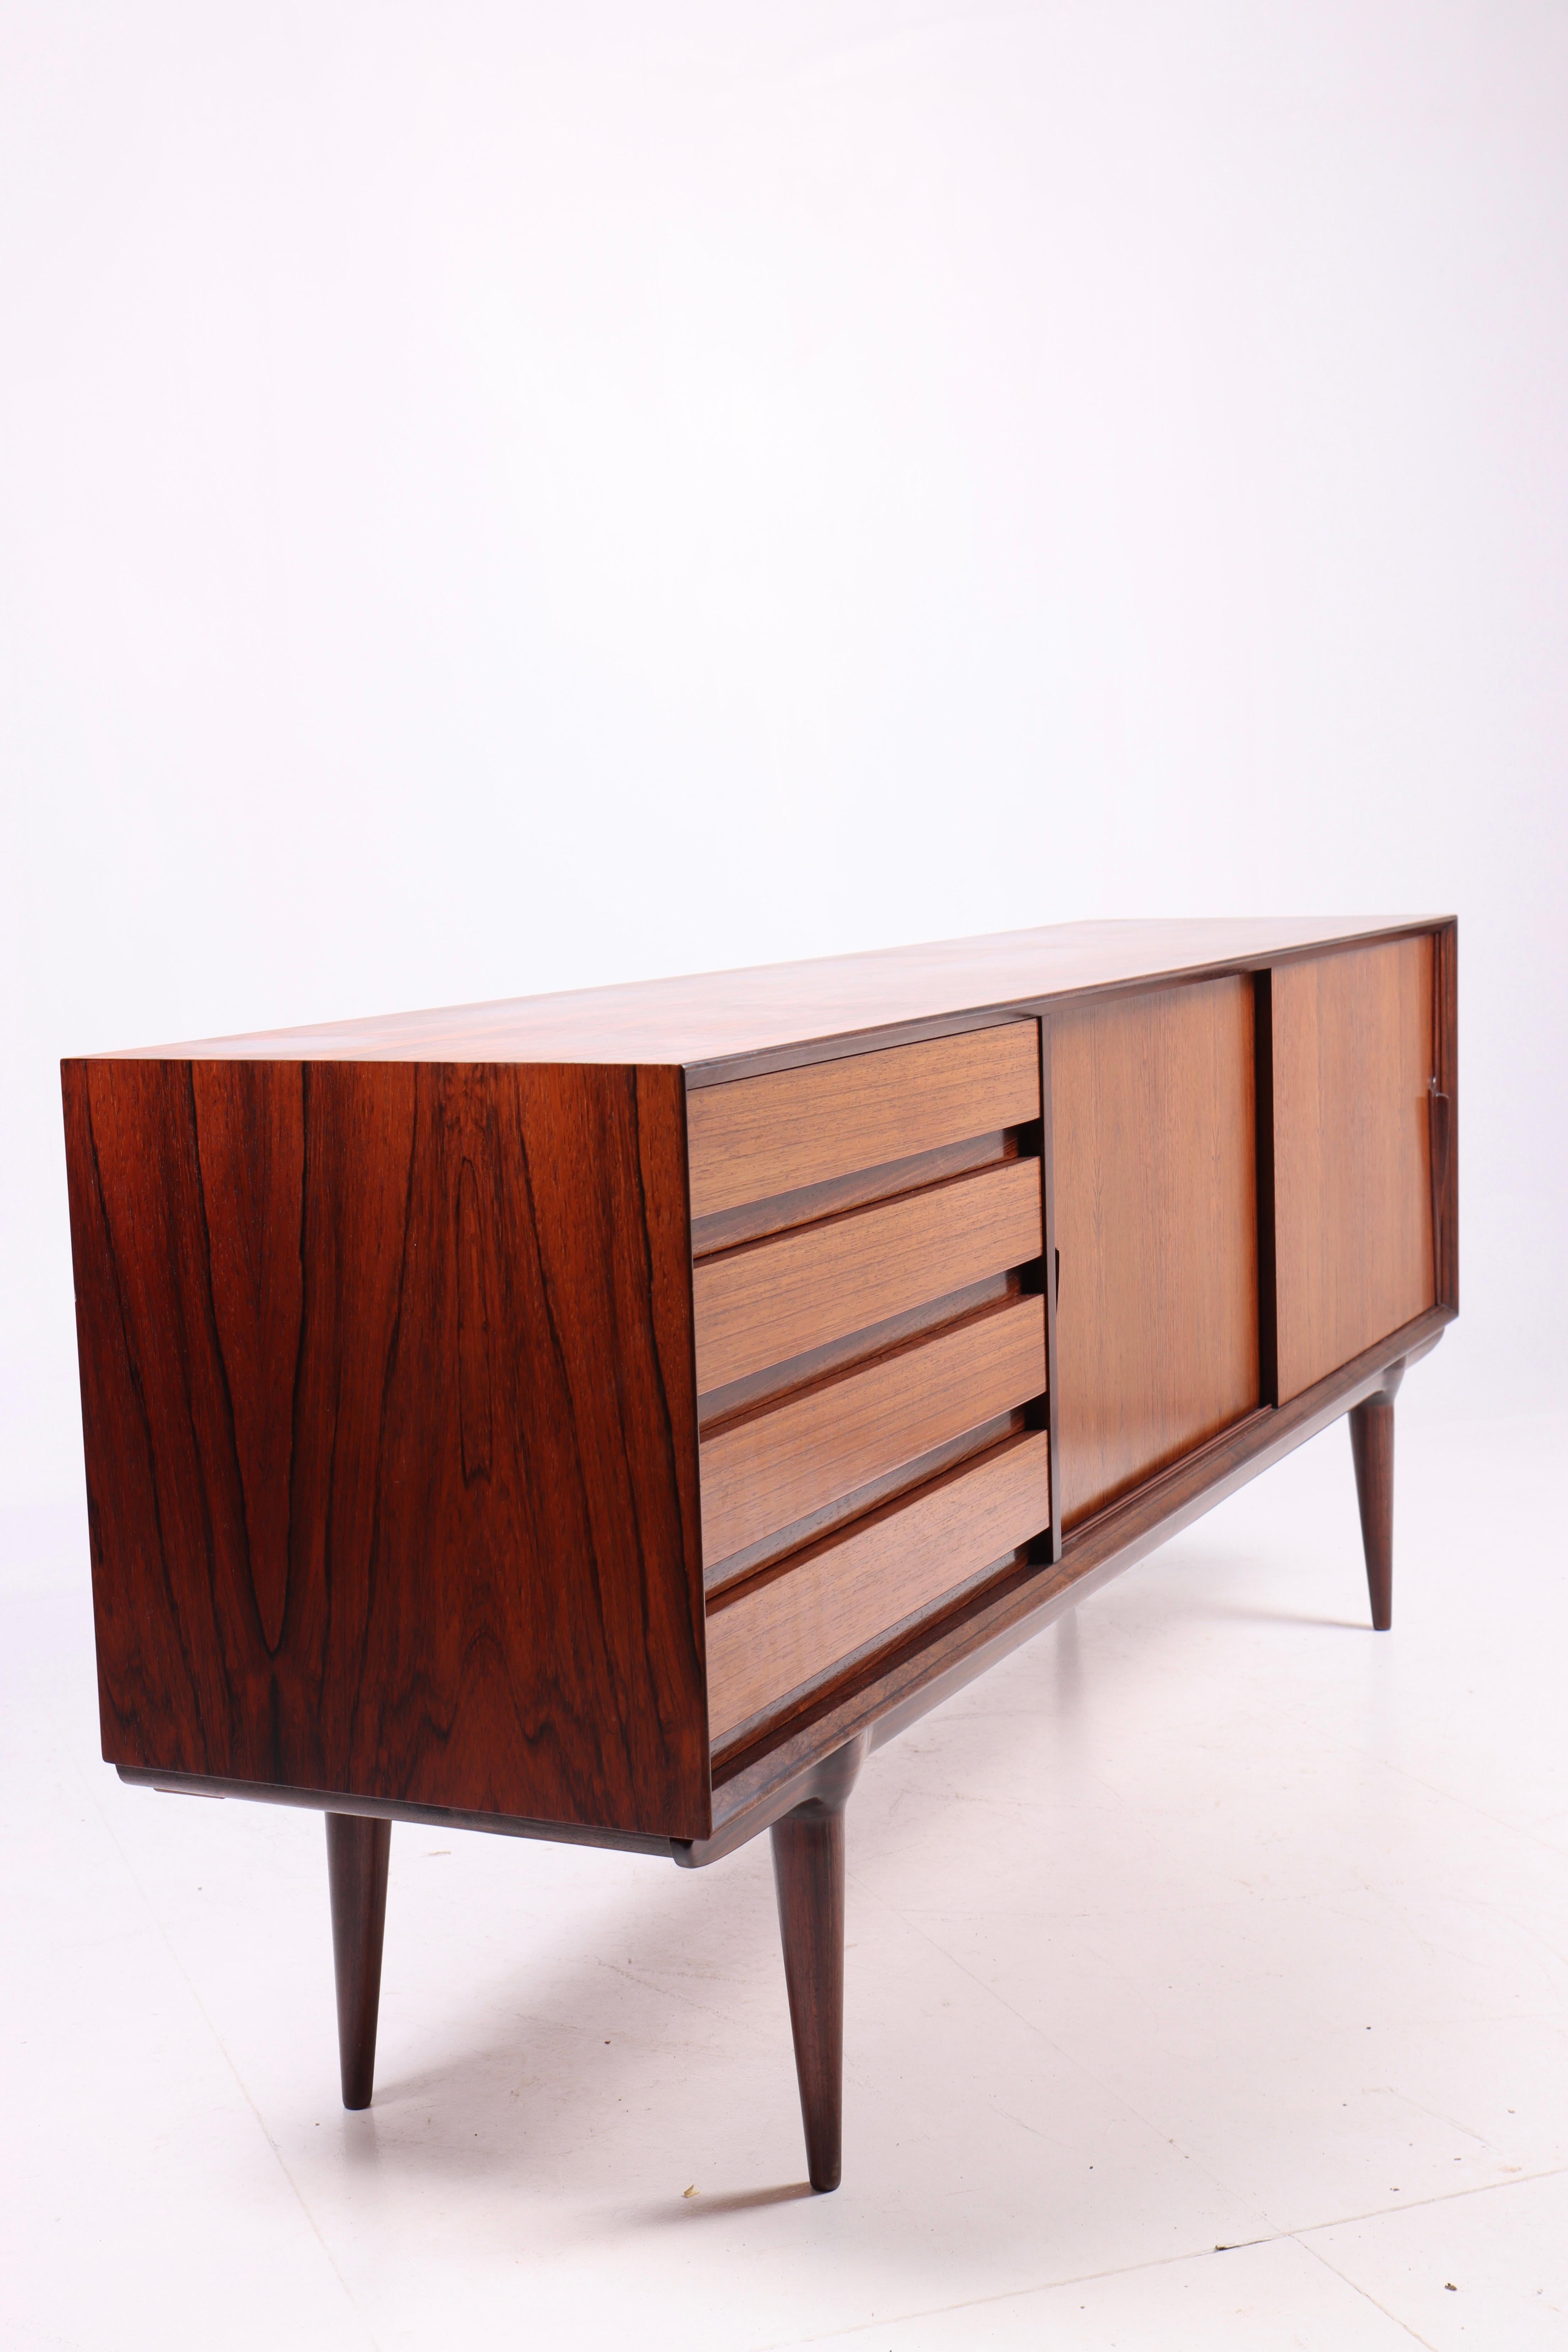 Midcentury Sideboard in Rosewood by Omann Jun, 1950s For Sale 4